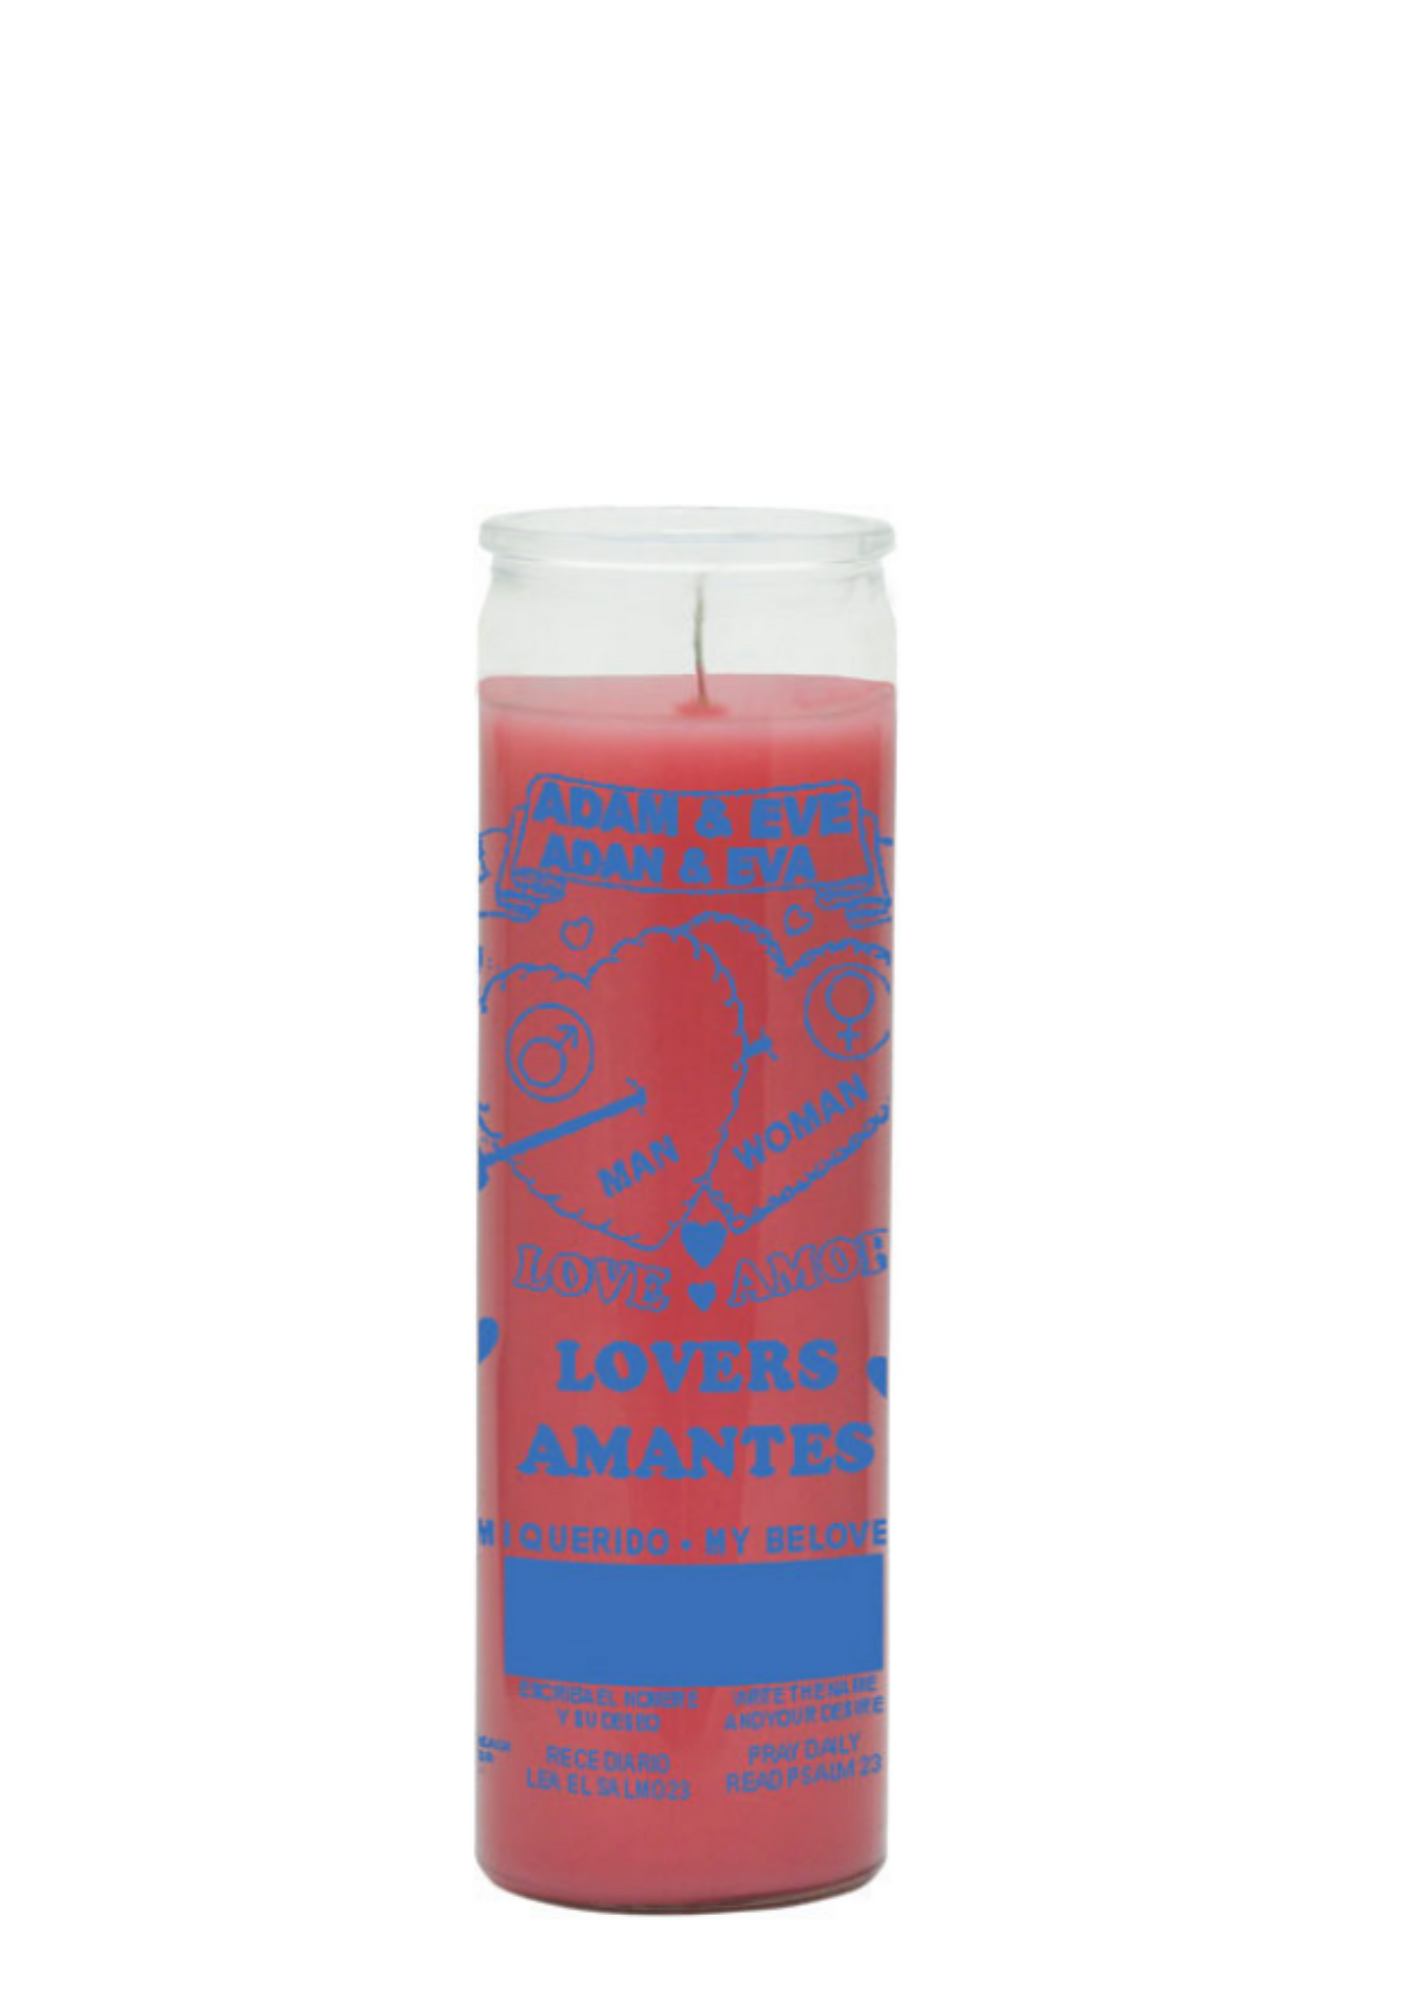 Adam & Eve (Pink) 1 Color 7 Day Candle